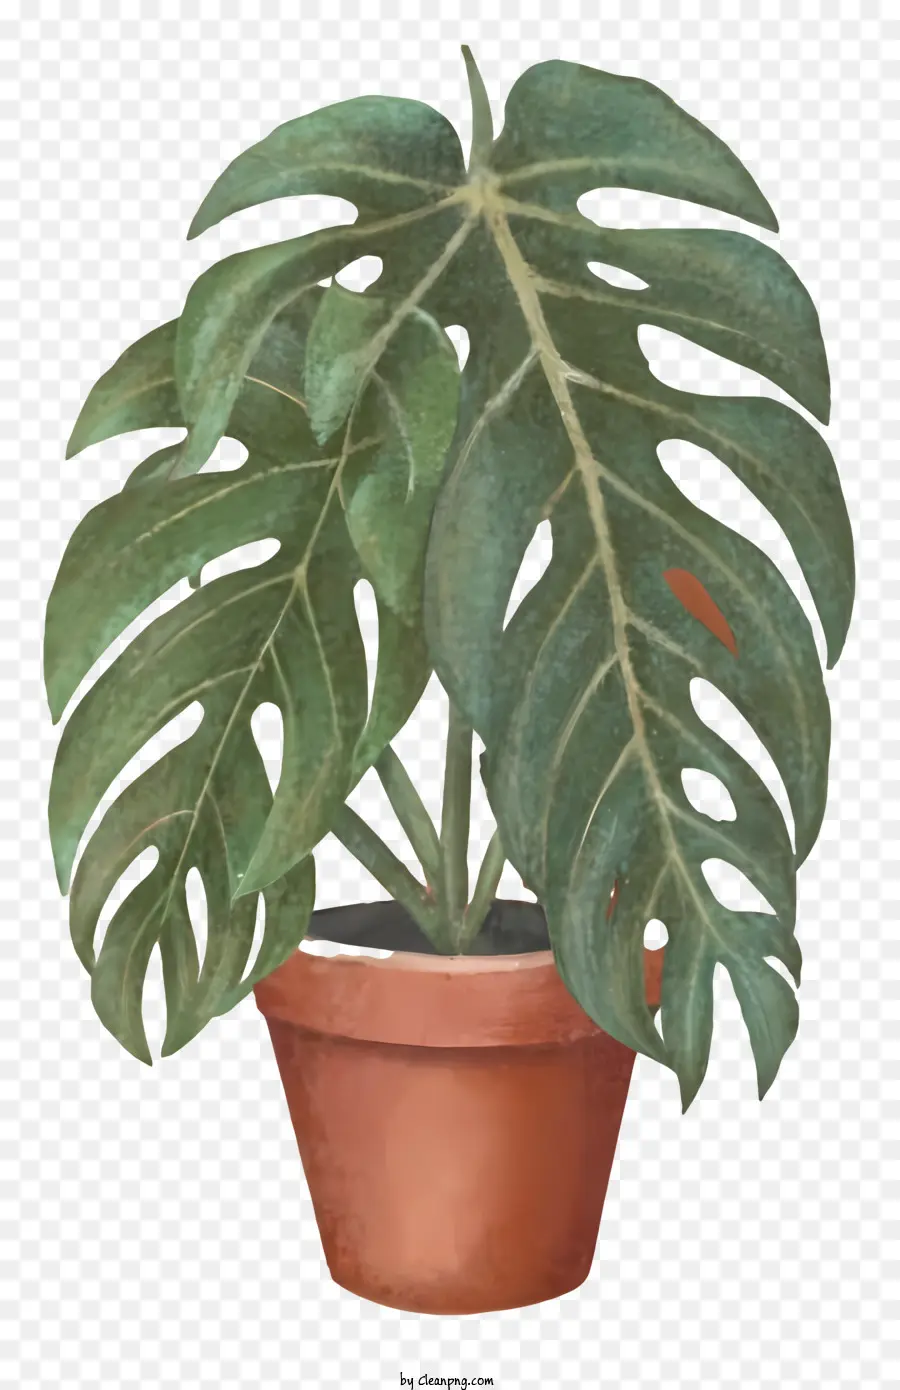 ceramic potted plant green leaves veins on leaves healthy plant well-cared for plant